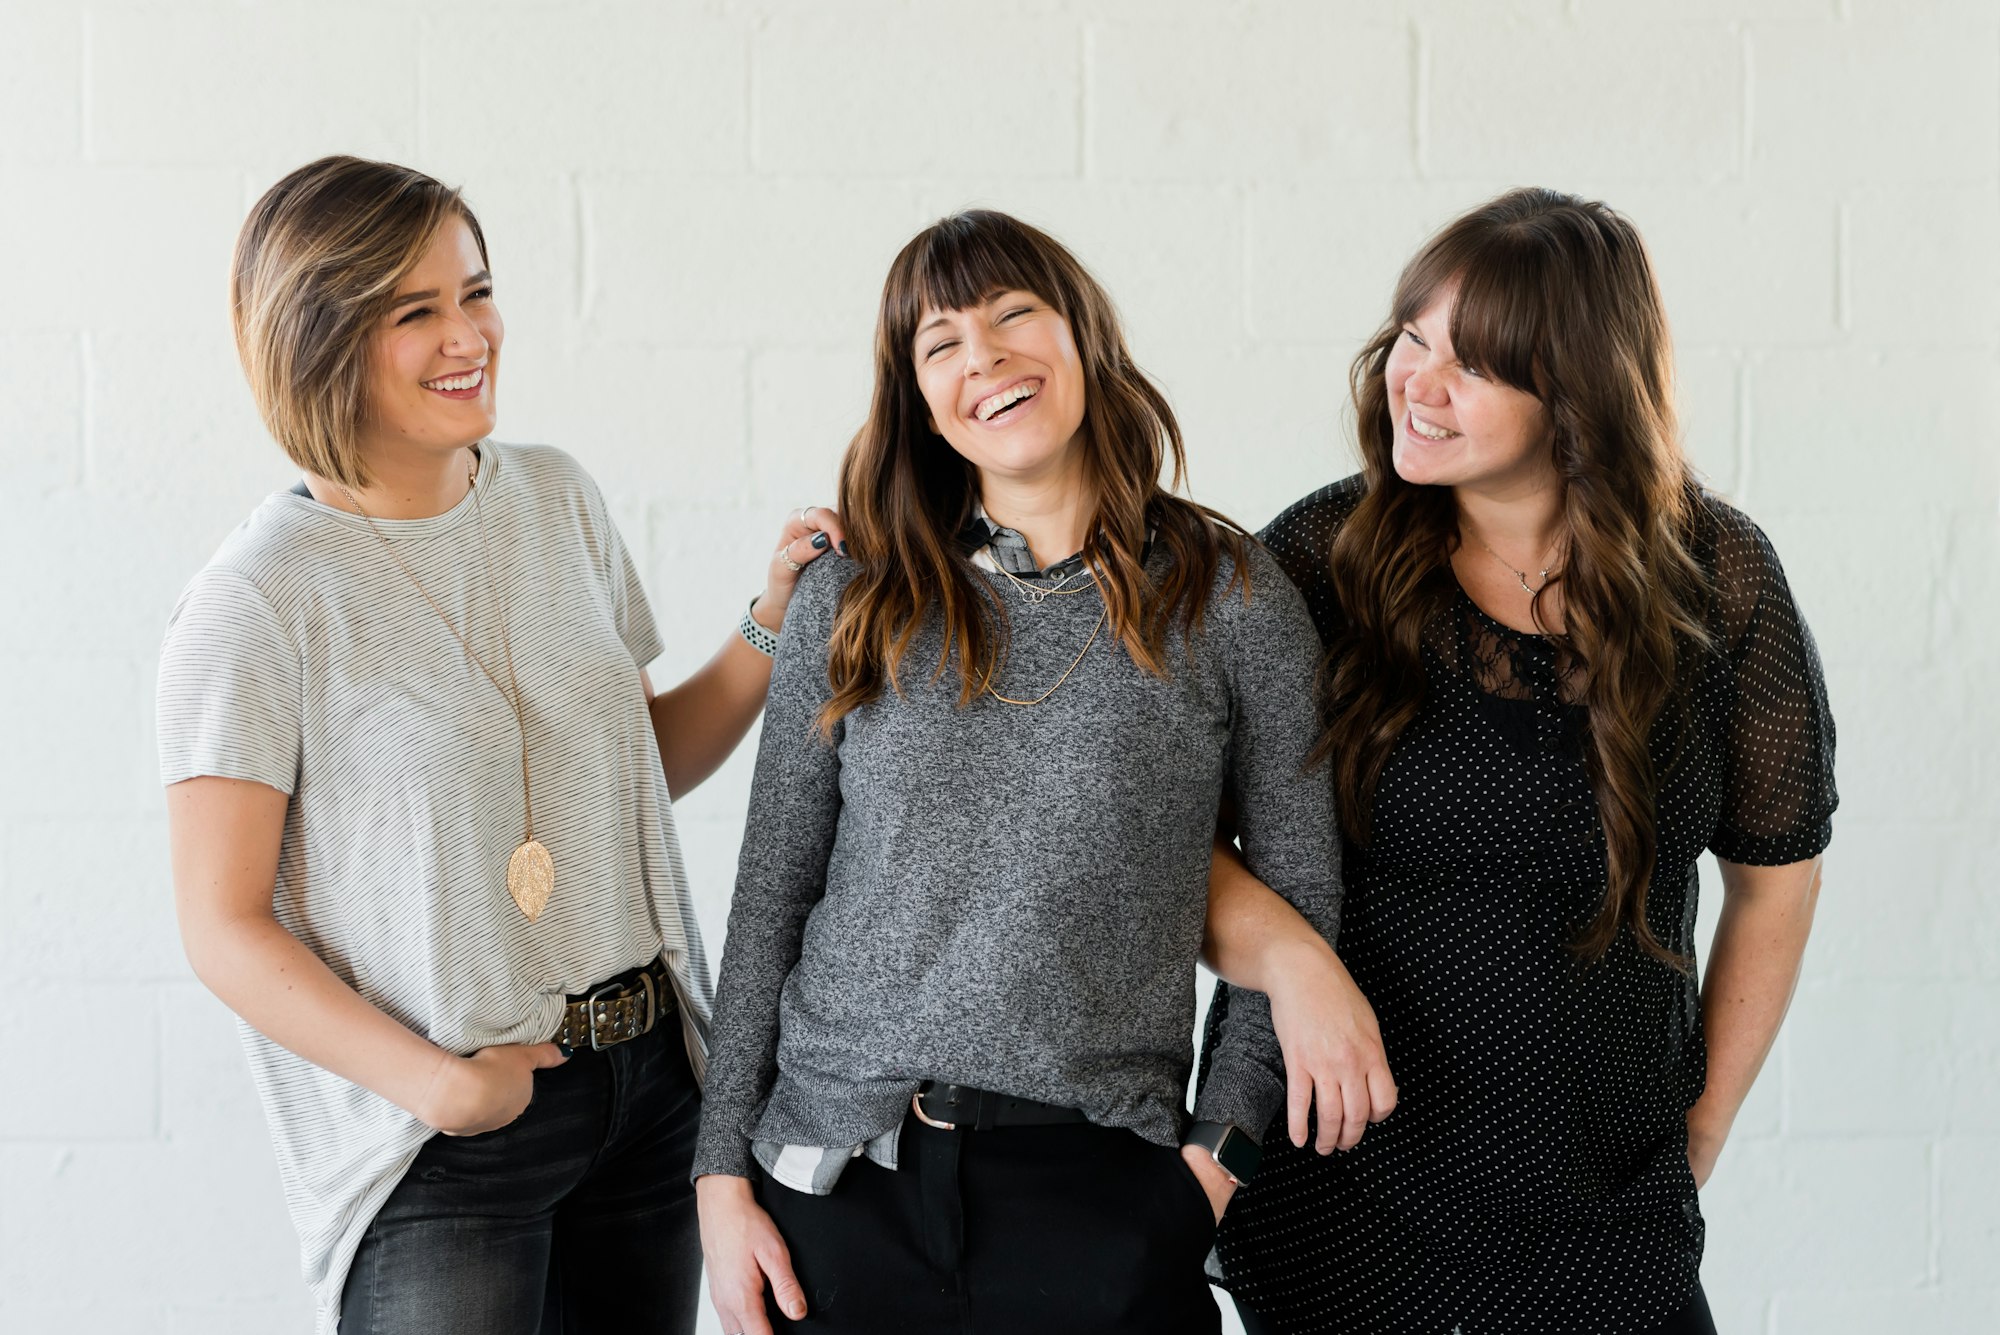 Strong women, female business owners share a laugh as they discuss trendy topics and enjoy life. 

Kulør Hair Design and Color Studio is the best place for hair styling, located at 22 East Center Street in Logan, Utah. 
https://www.instagram.com/kulorsalon/
https://www.kulorsalon.com/
435-213-9075
https://www.aveda.com/salon/KulorSalon

https://www.instagram.com/AwCreativeUT/
https://www.AwCreativeUT.com/
#AwCreativeUT Adam Winger #awcreative #AdamWinger 